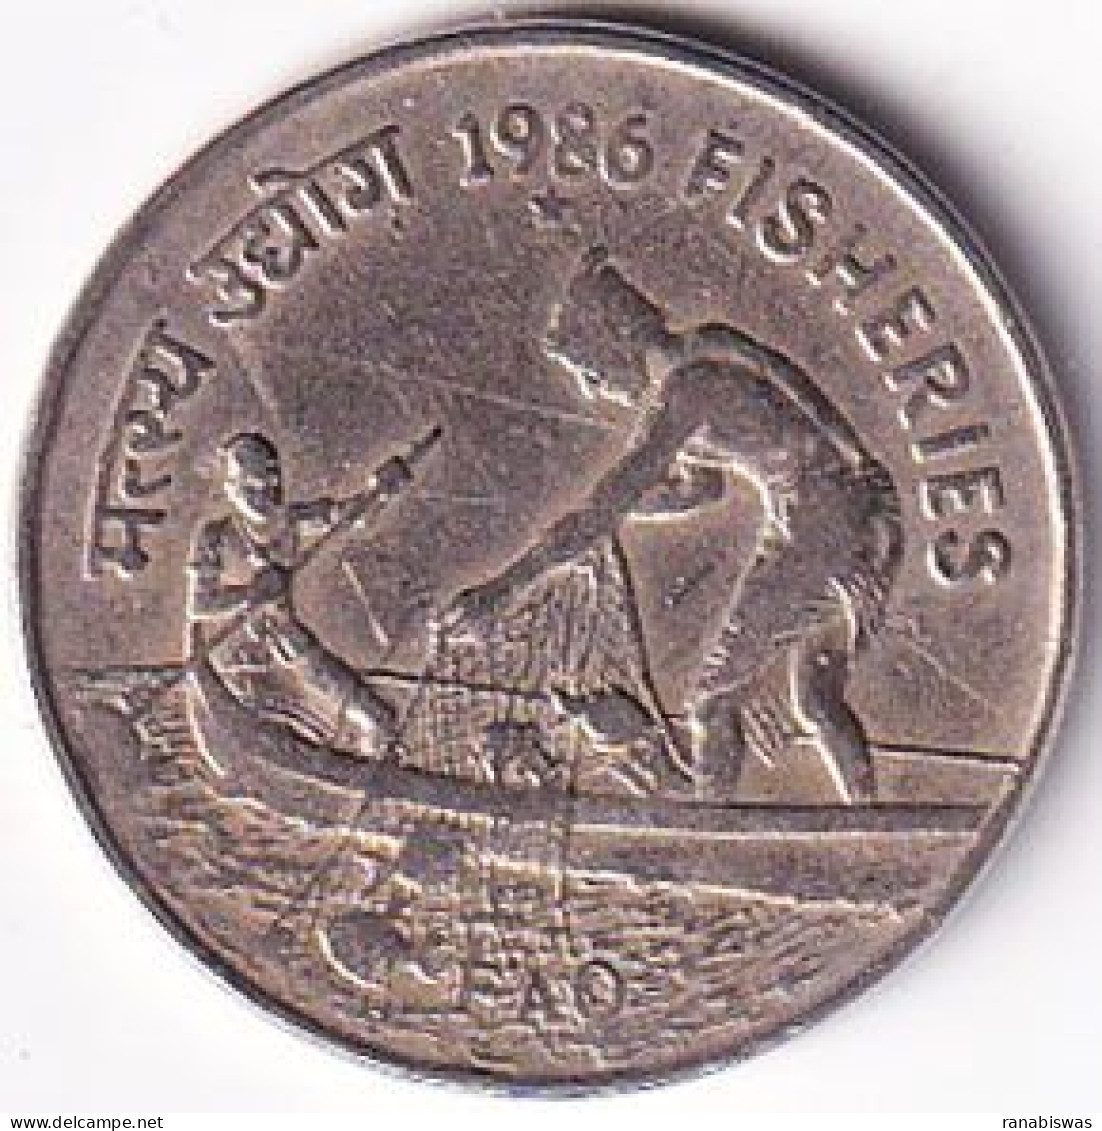 INDIA COIN LOT 27, 50 PAISE 1986, FISHERIES, FAO, HYDERABAD MINT, AUNC, SCARE - Indien